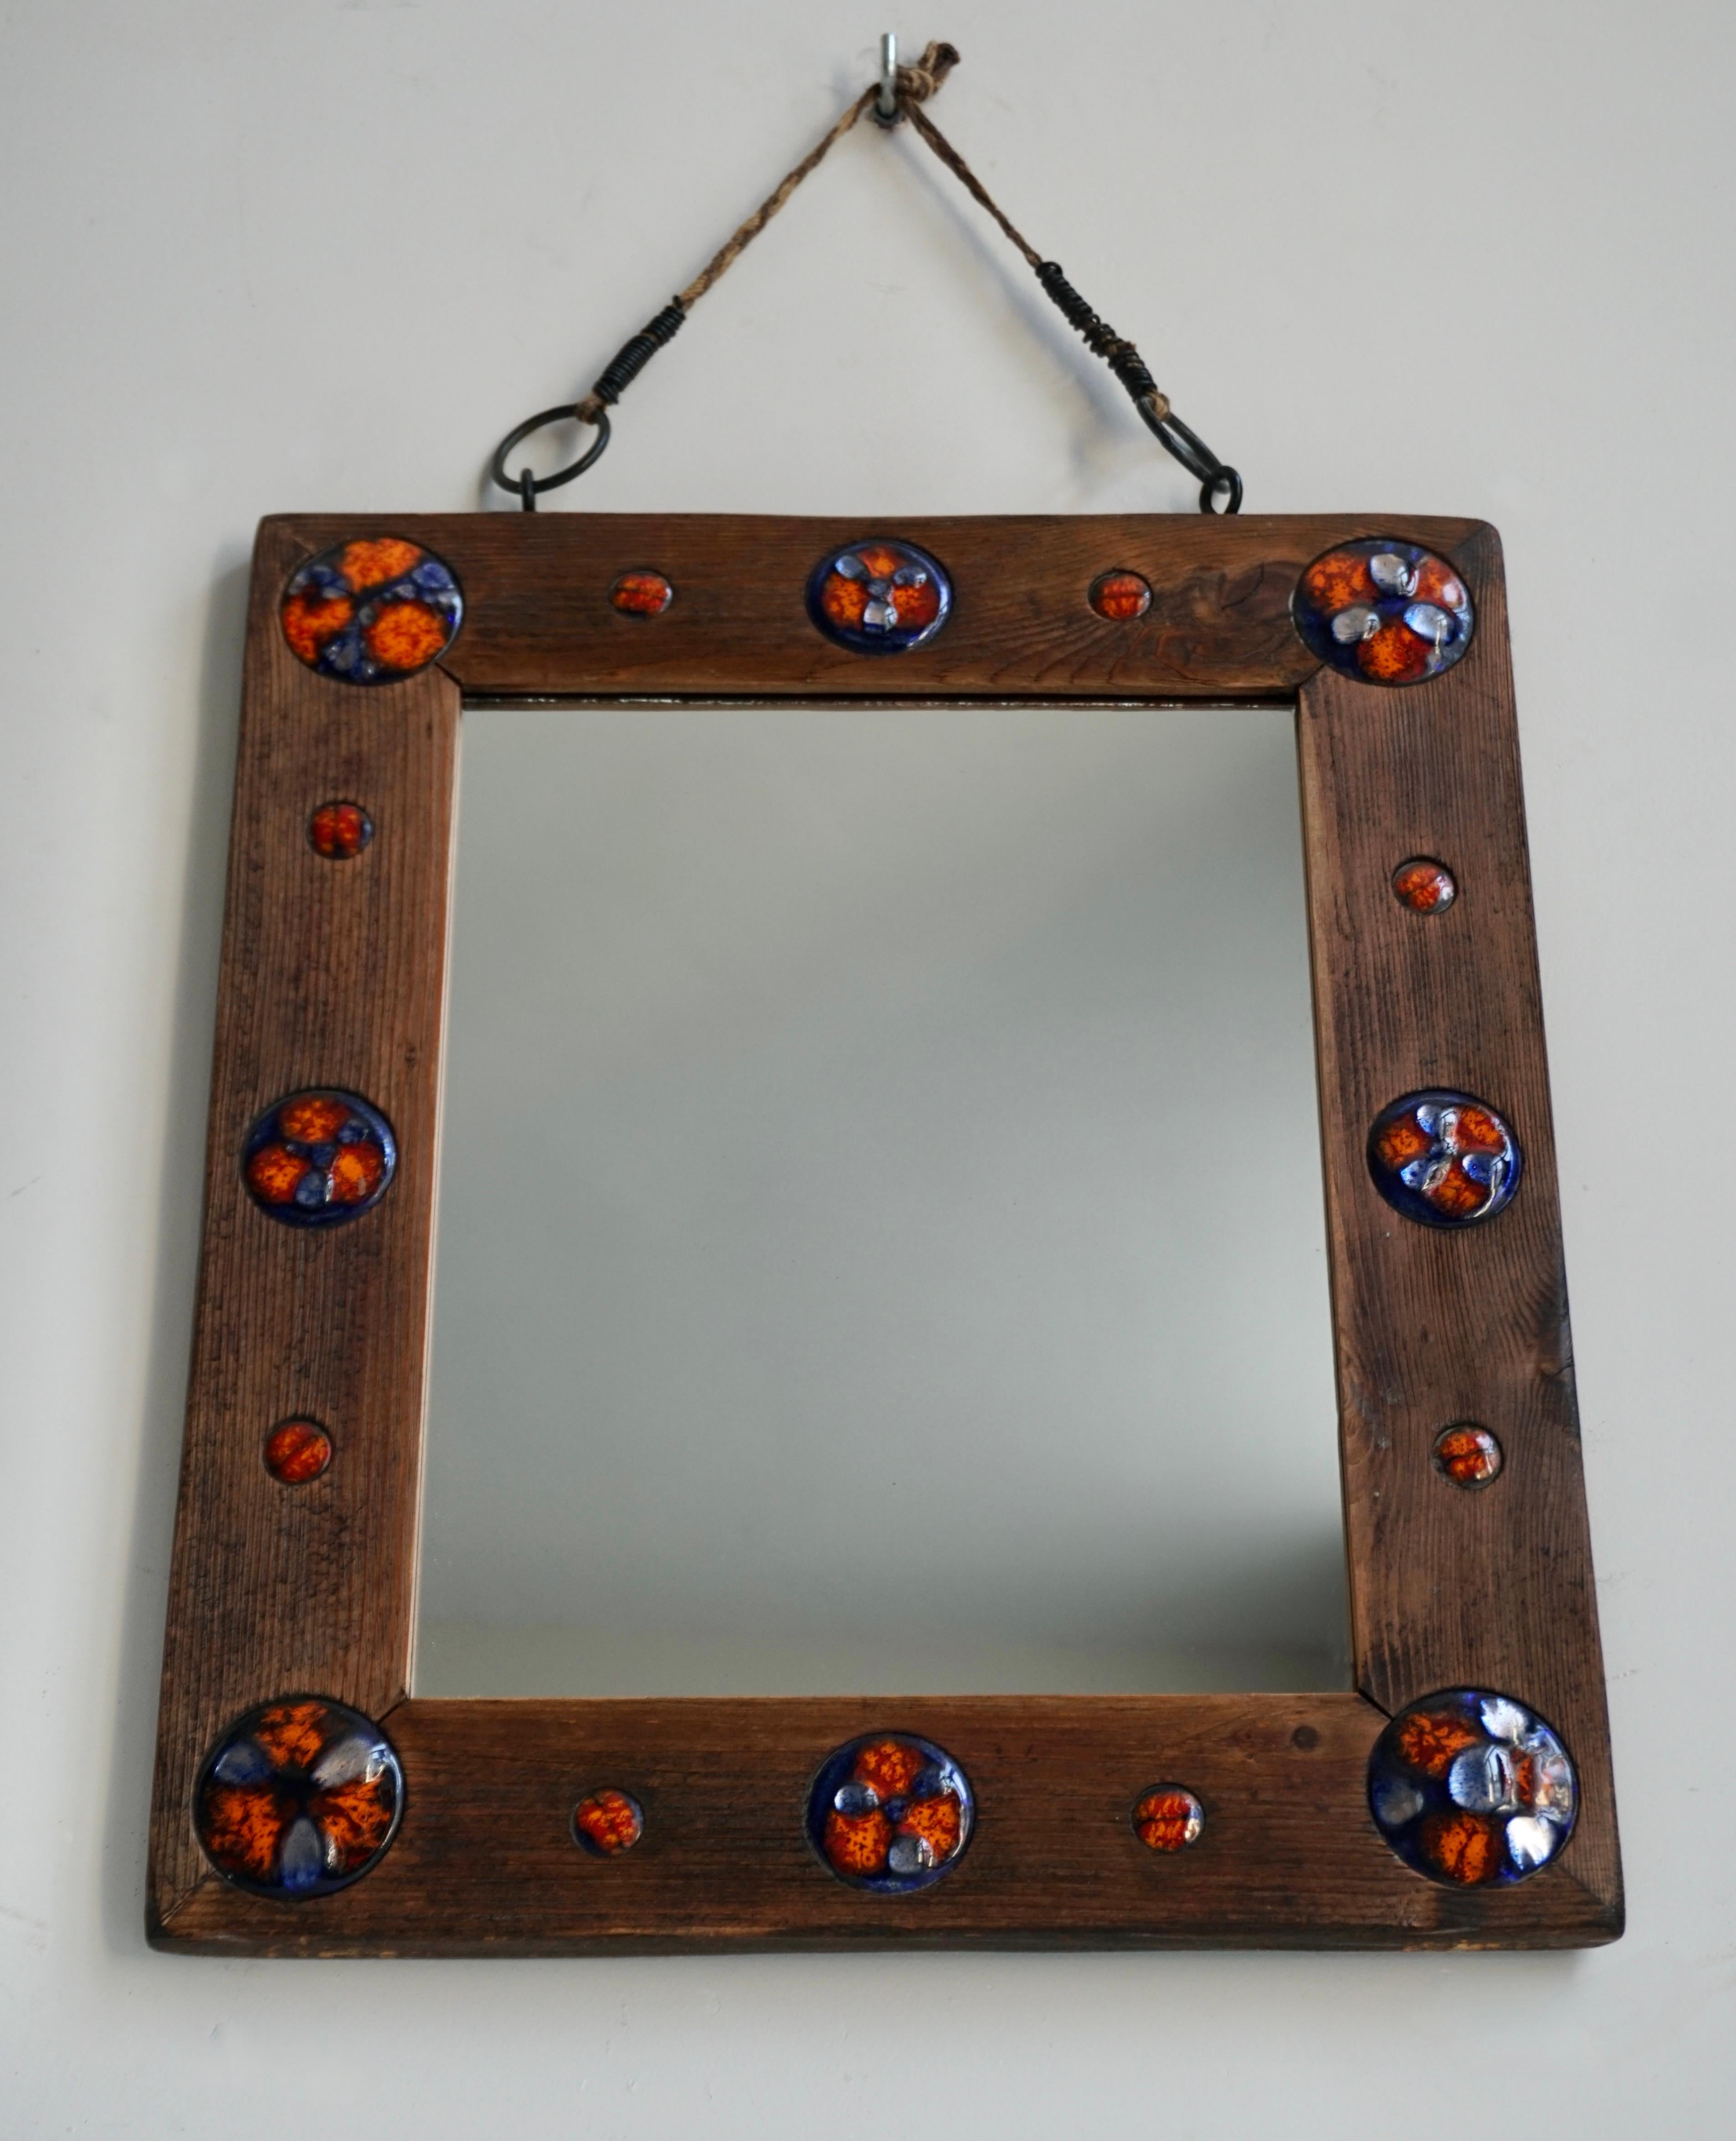 Wooden mirror with enamel decorations.

A rectangular wooden mirror with colored enamel decorations hanging from a rope.